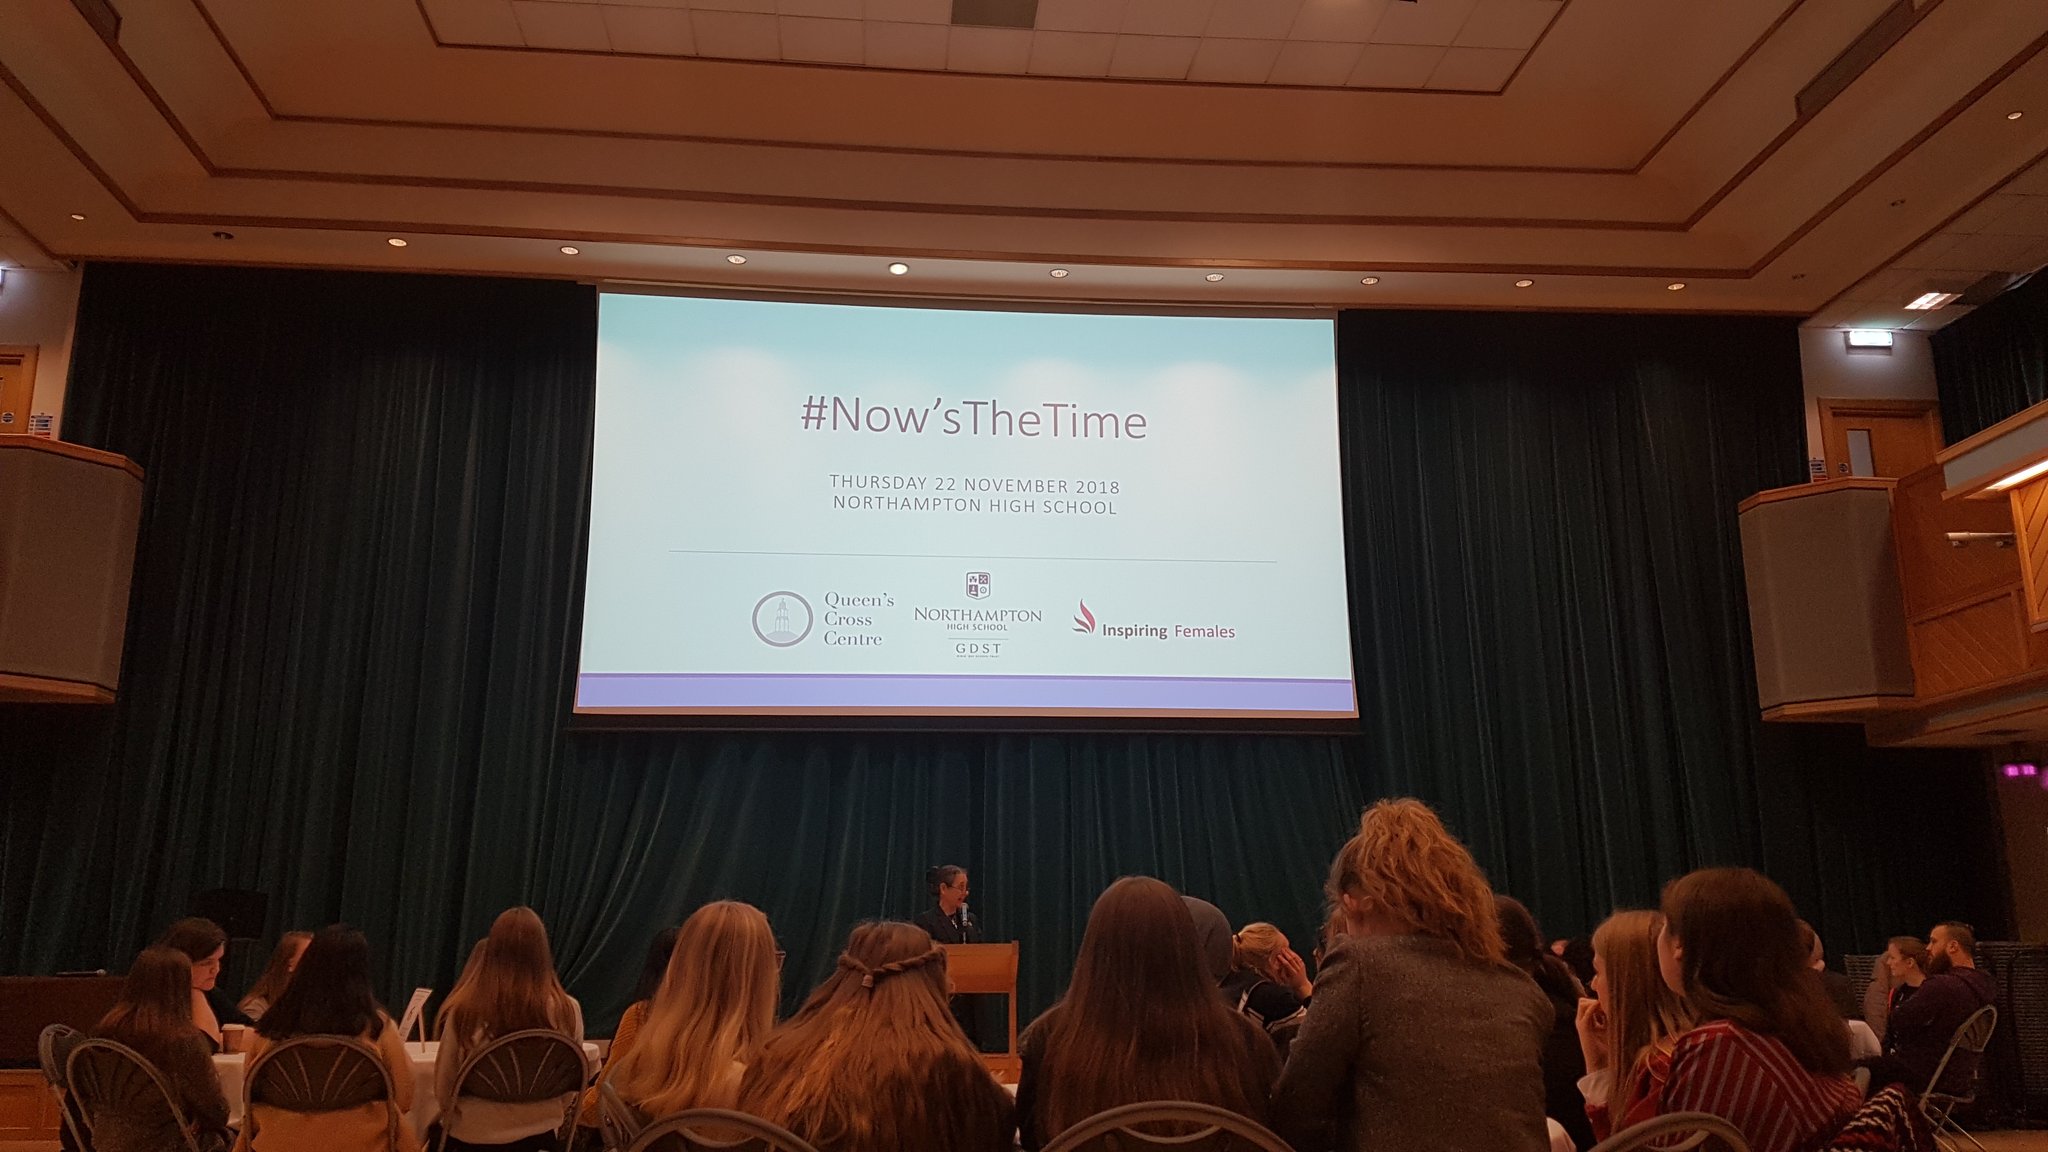 image photo nows the time conference